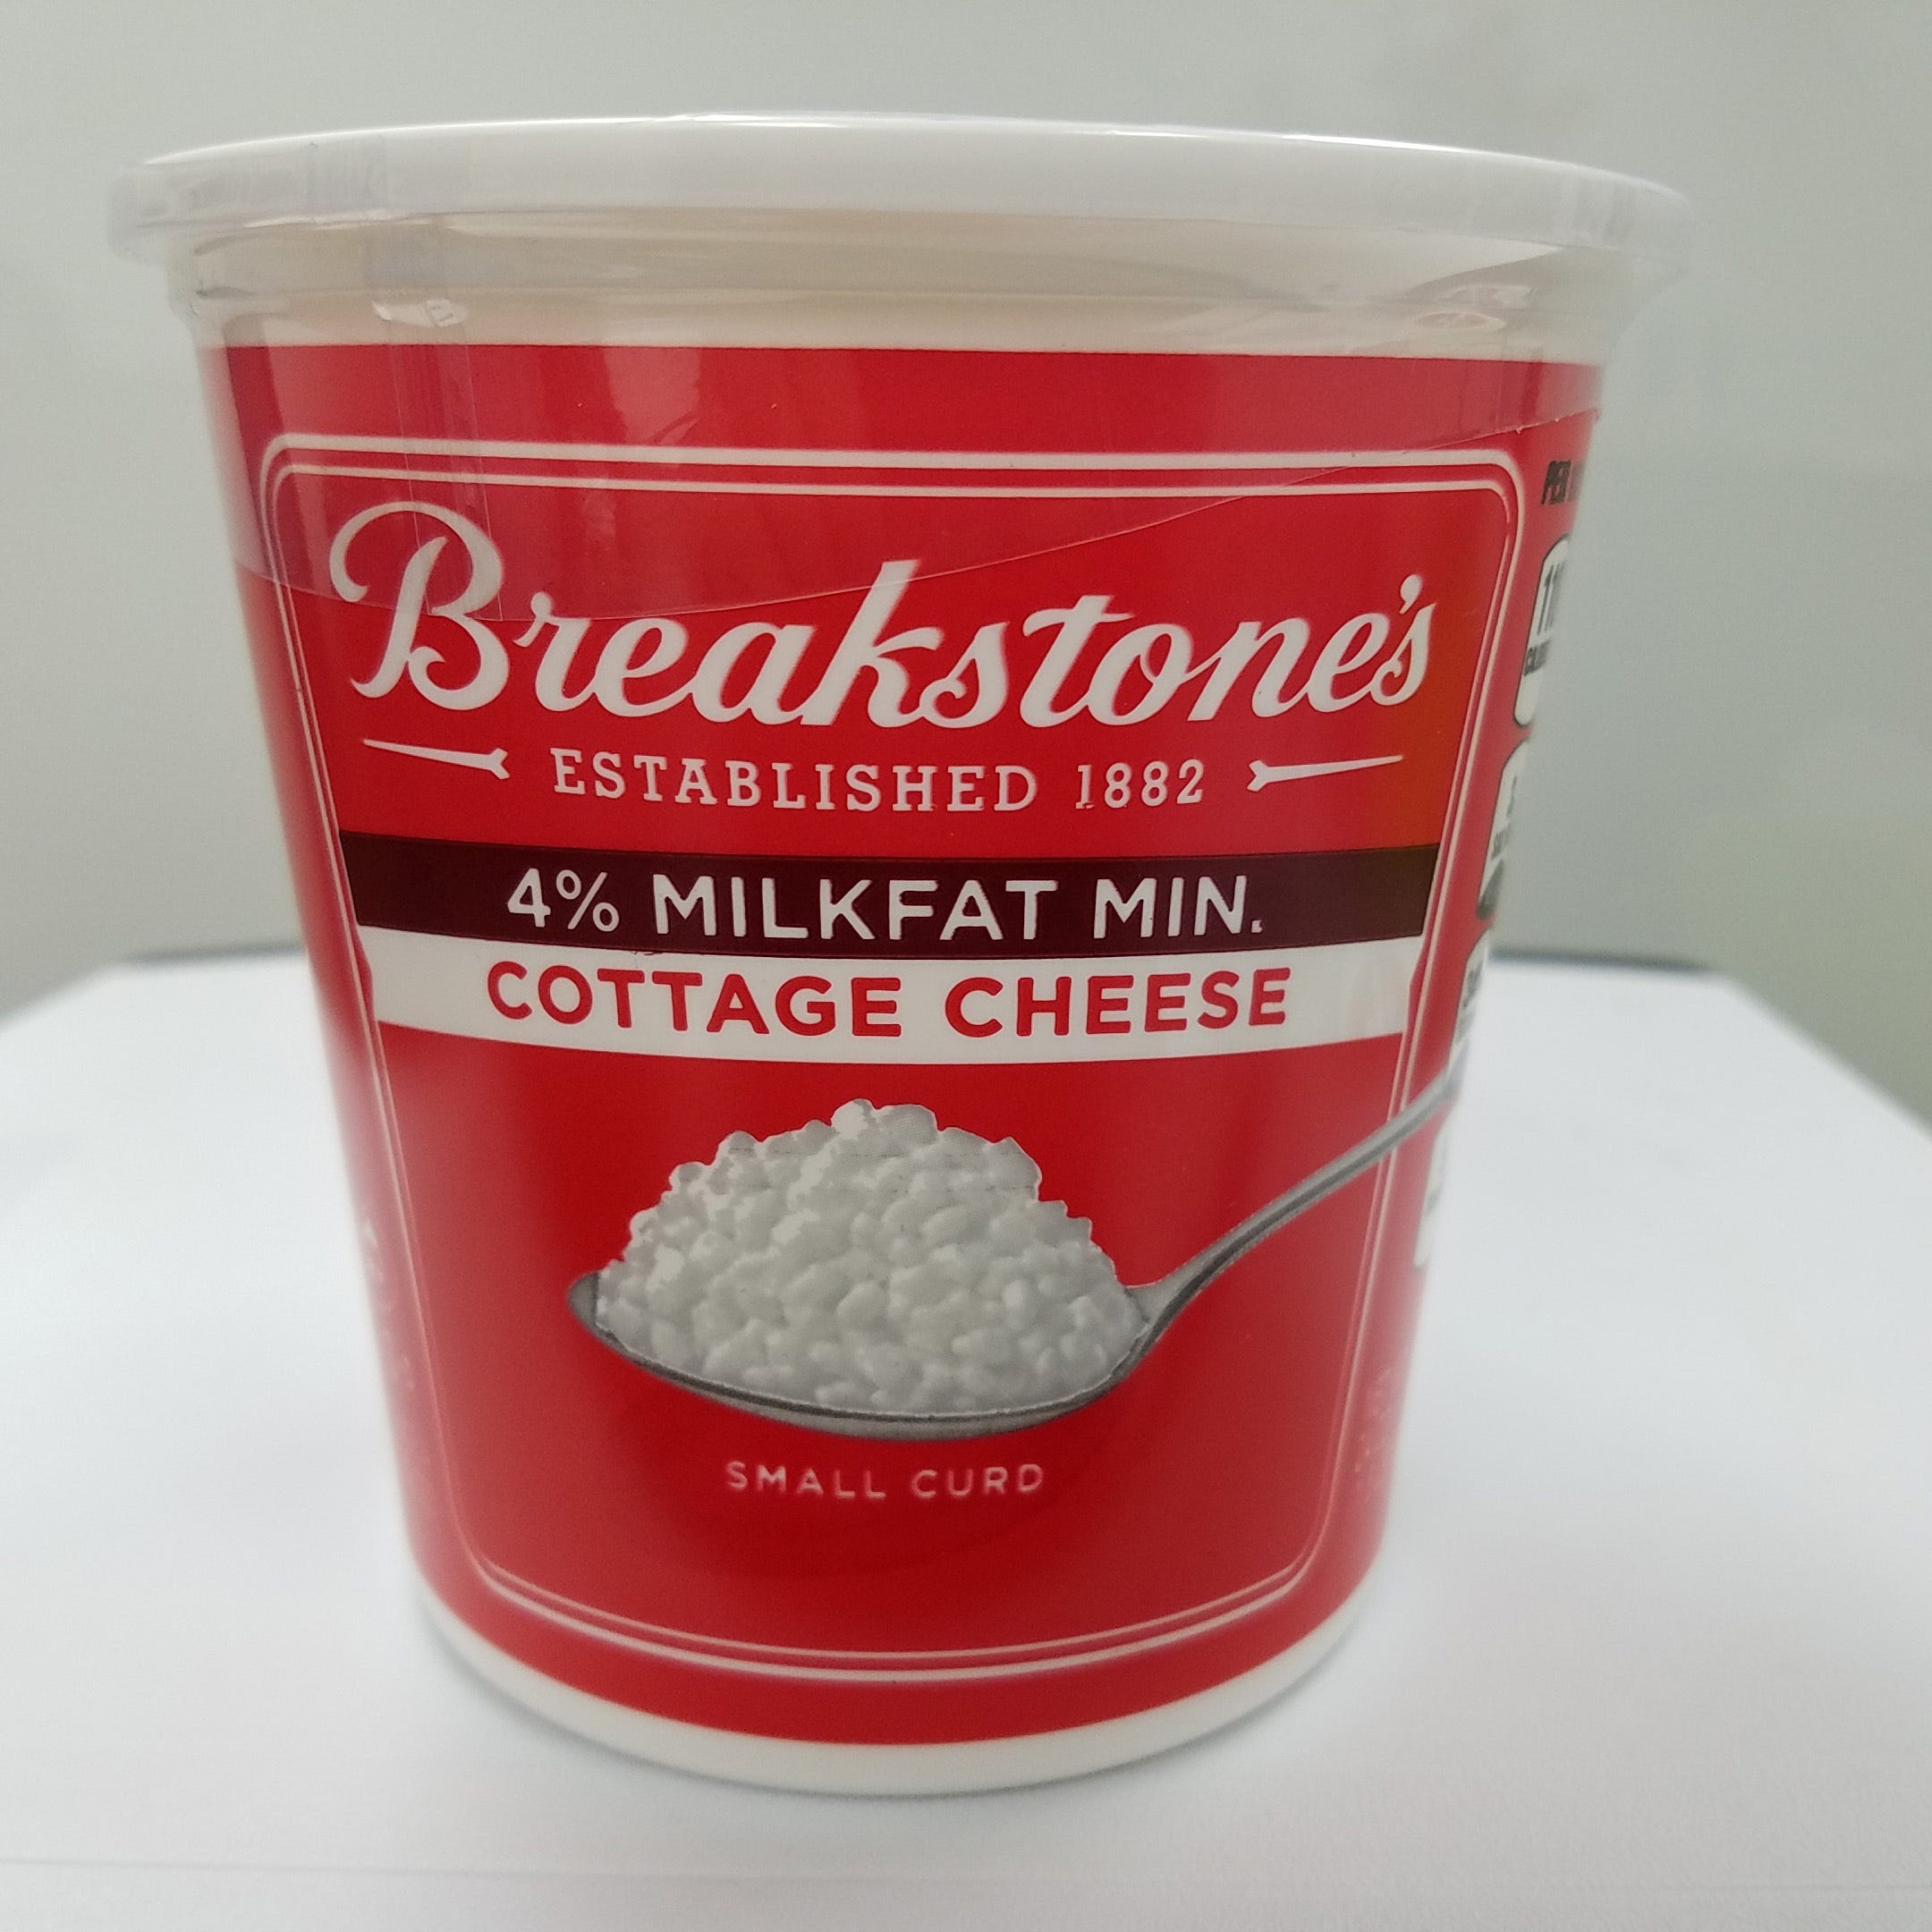 Recall: Cottage cheese recalled by Kraft Heinz on risk of plastic bits